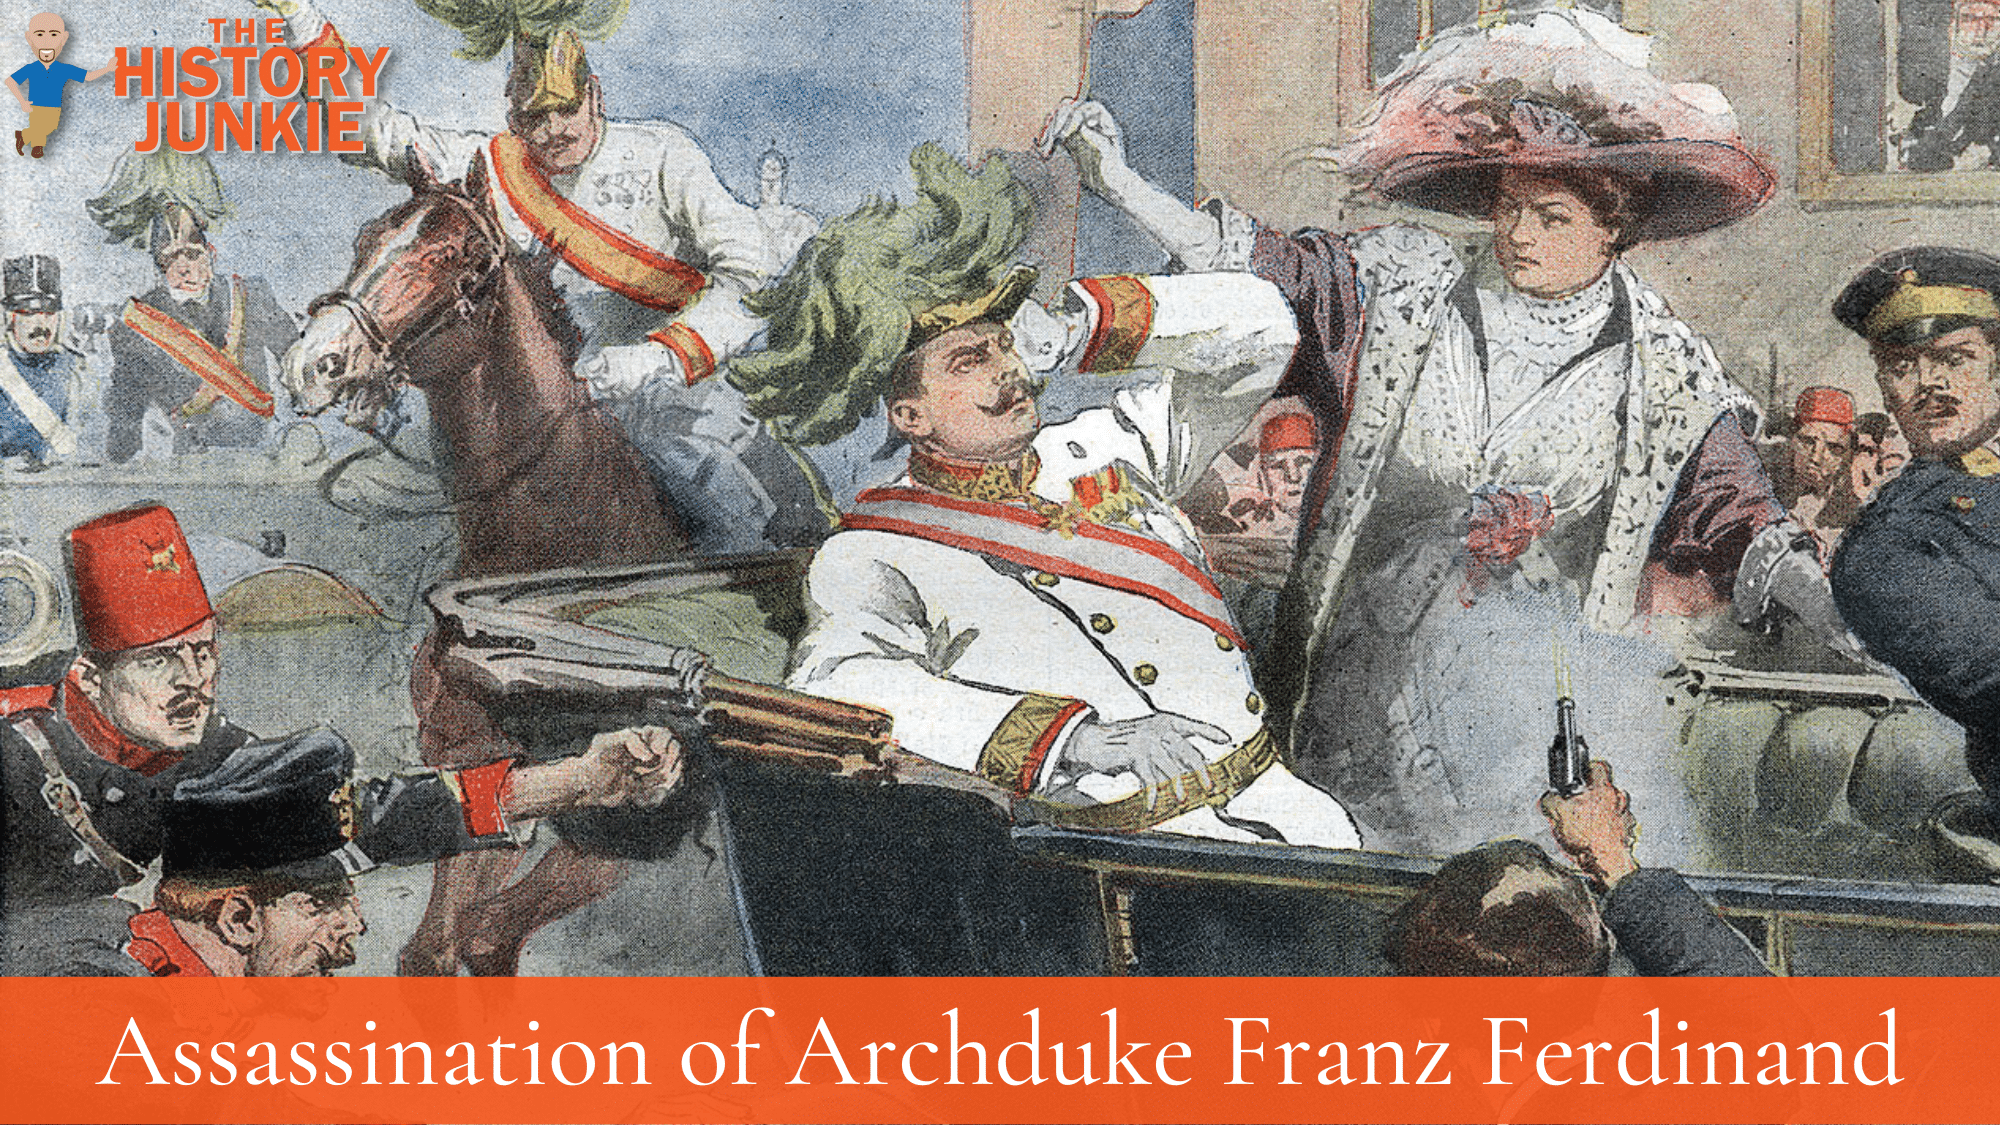 5 Facts About The Assassination Of Archduke Franz Ferdinand - The ...